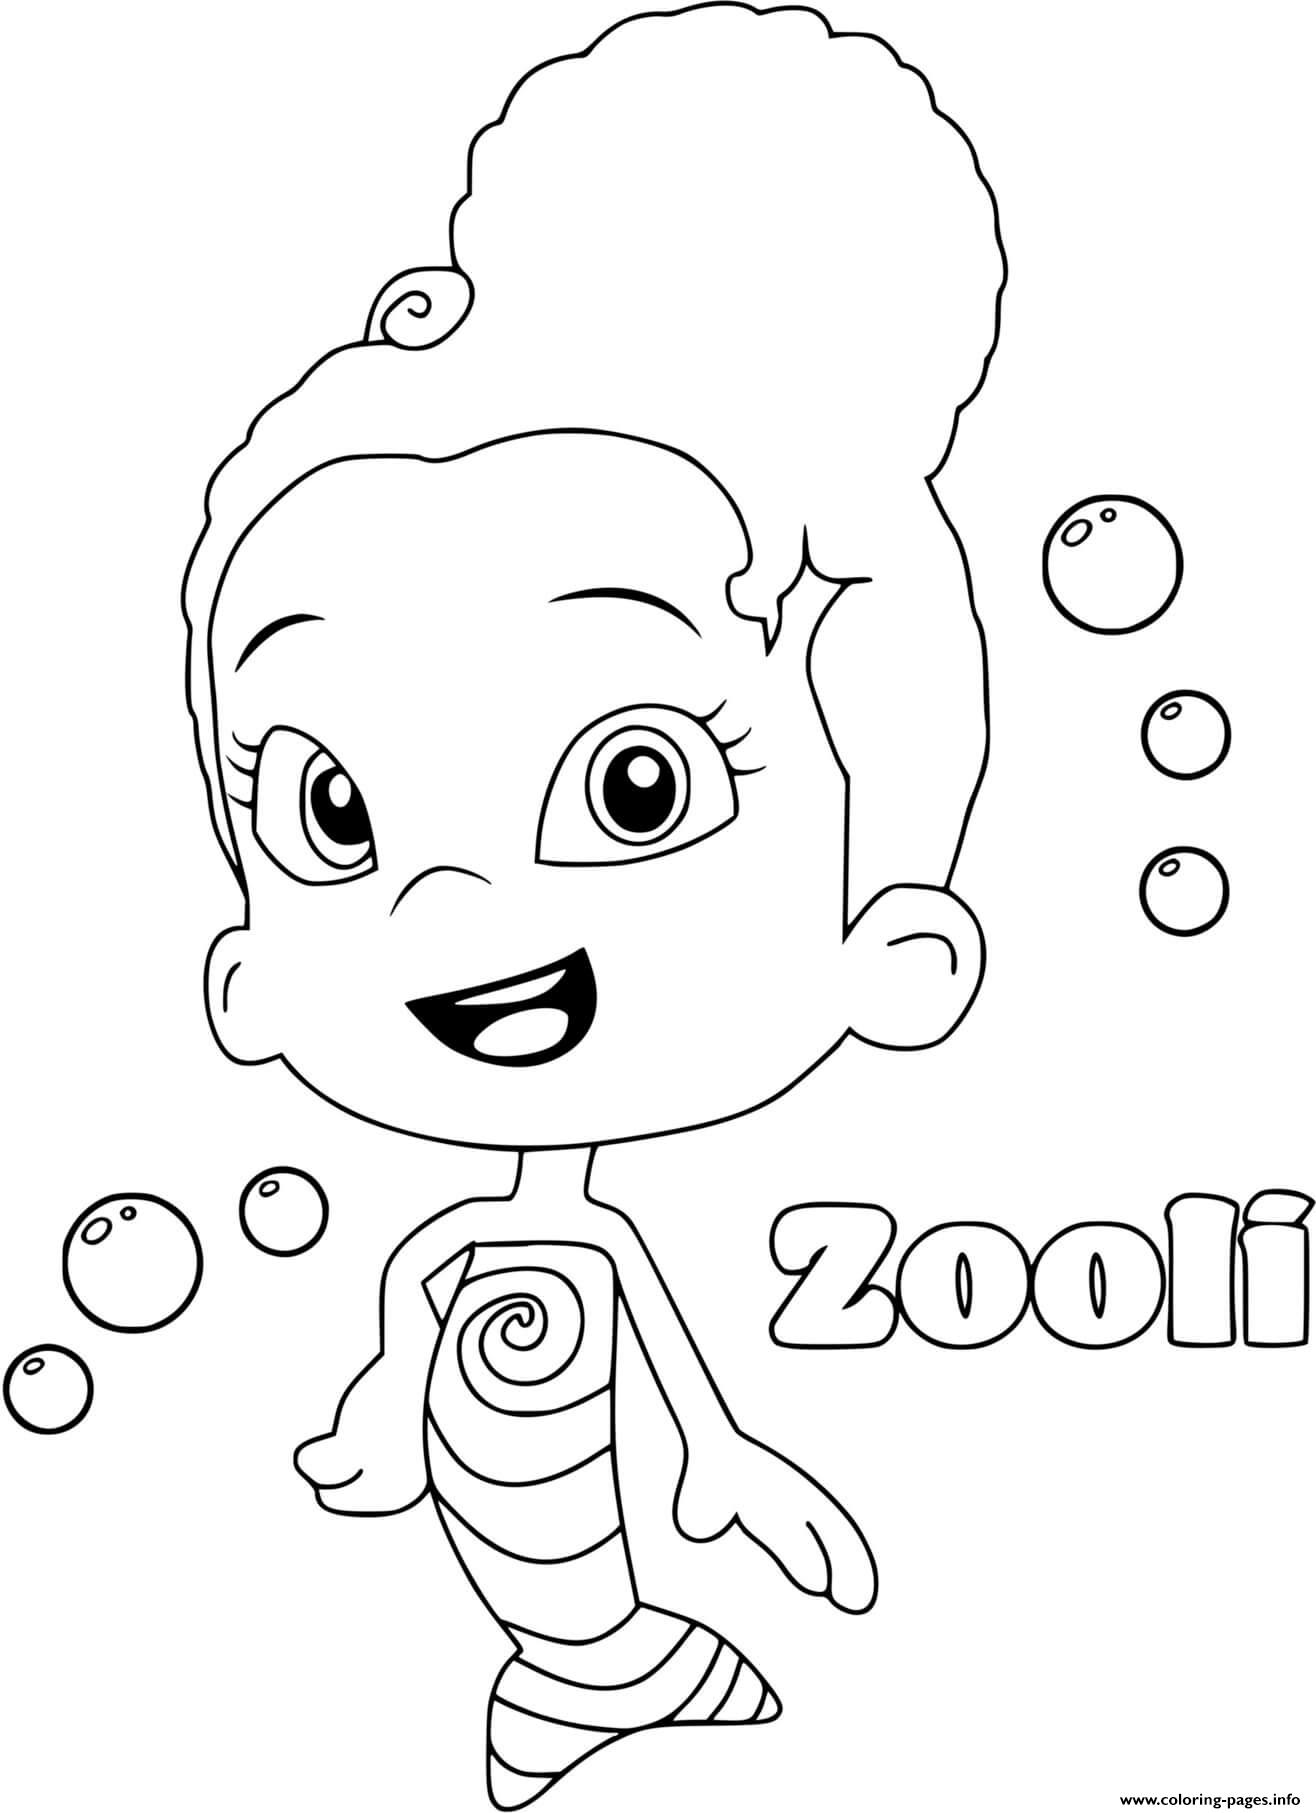 Zooli Bubble Guppies Coloring Pages Printable